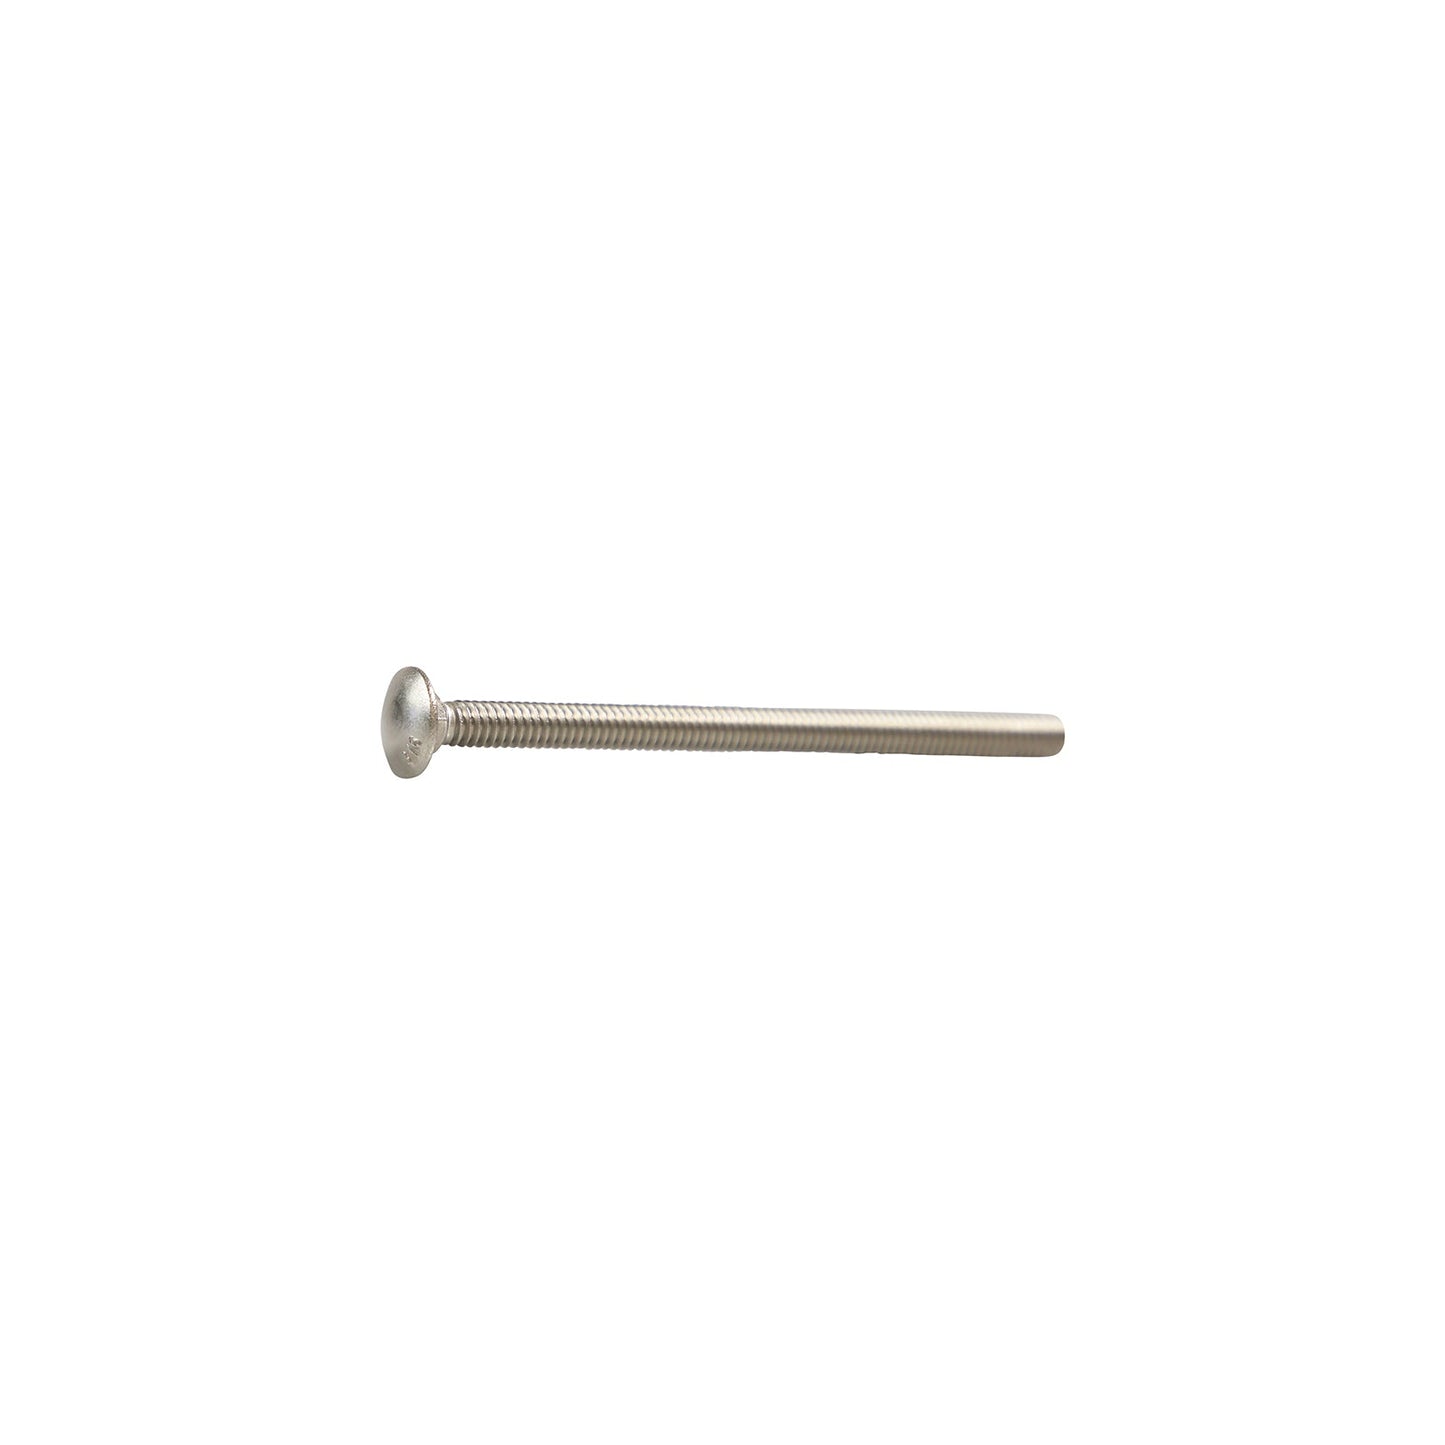 1/4"-20 x 4" Conquest Carriage Bolt - 316 Stainless Steel